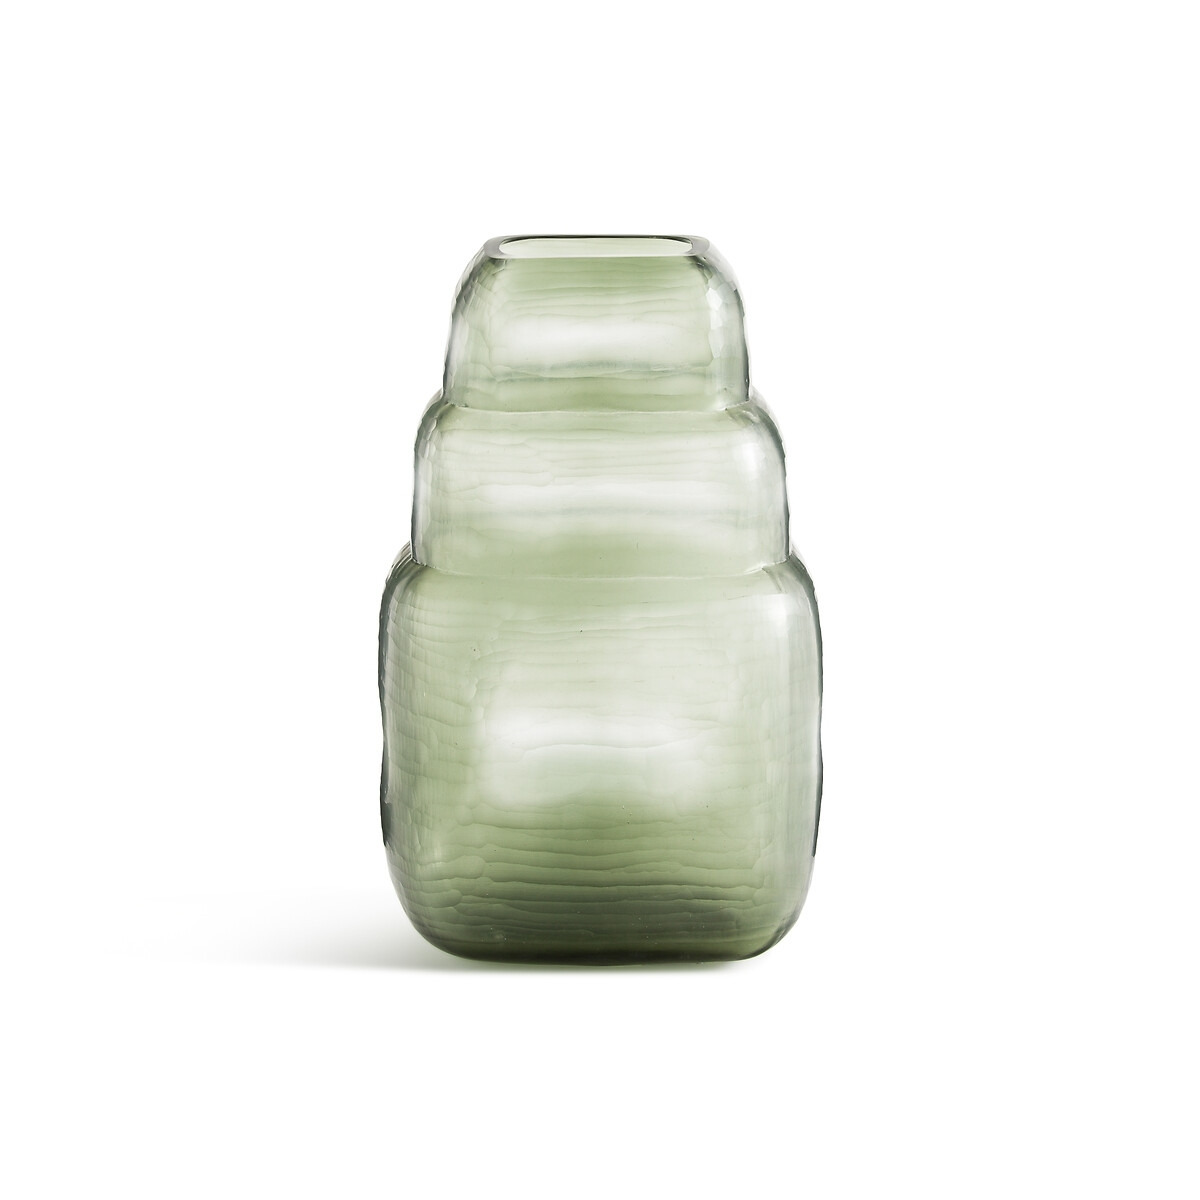 Parilo Opaque Frosted Glass Vase - image 1